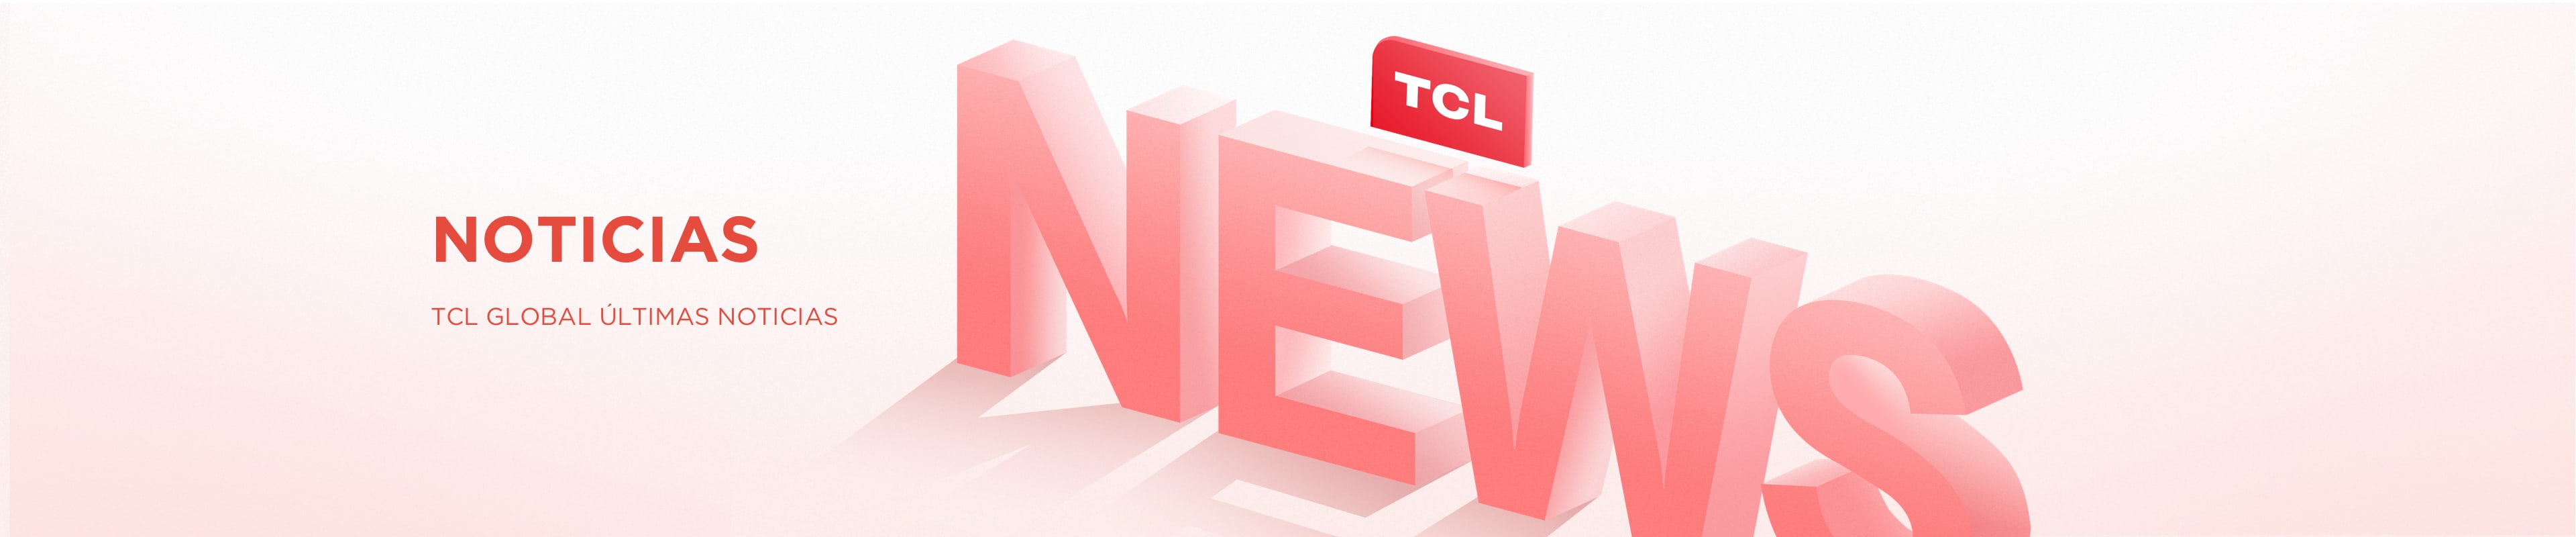 TCL Mini LED & QLED C-Series Collection